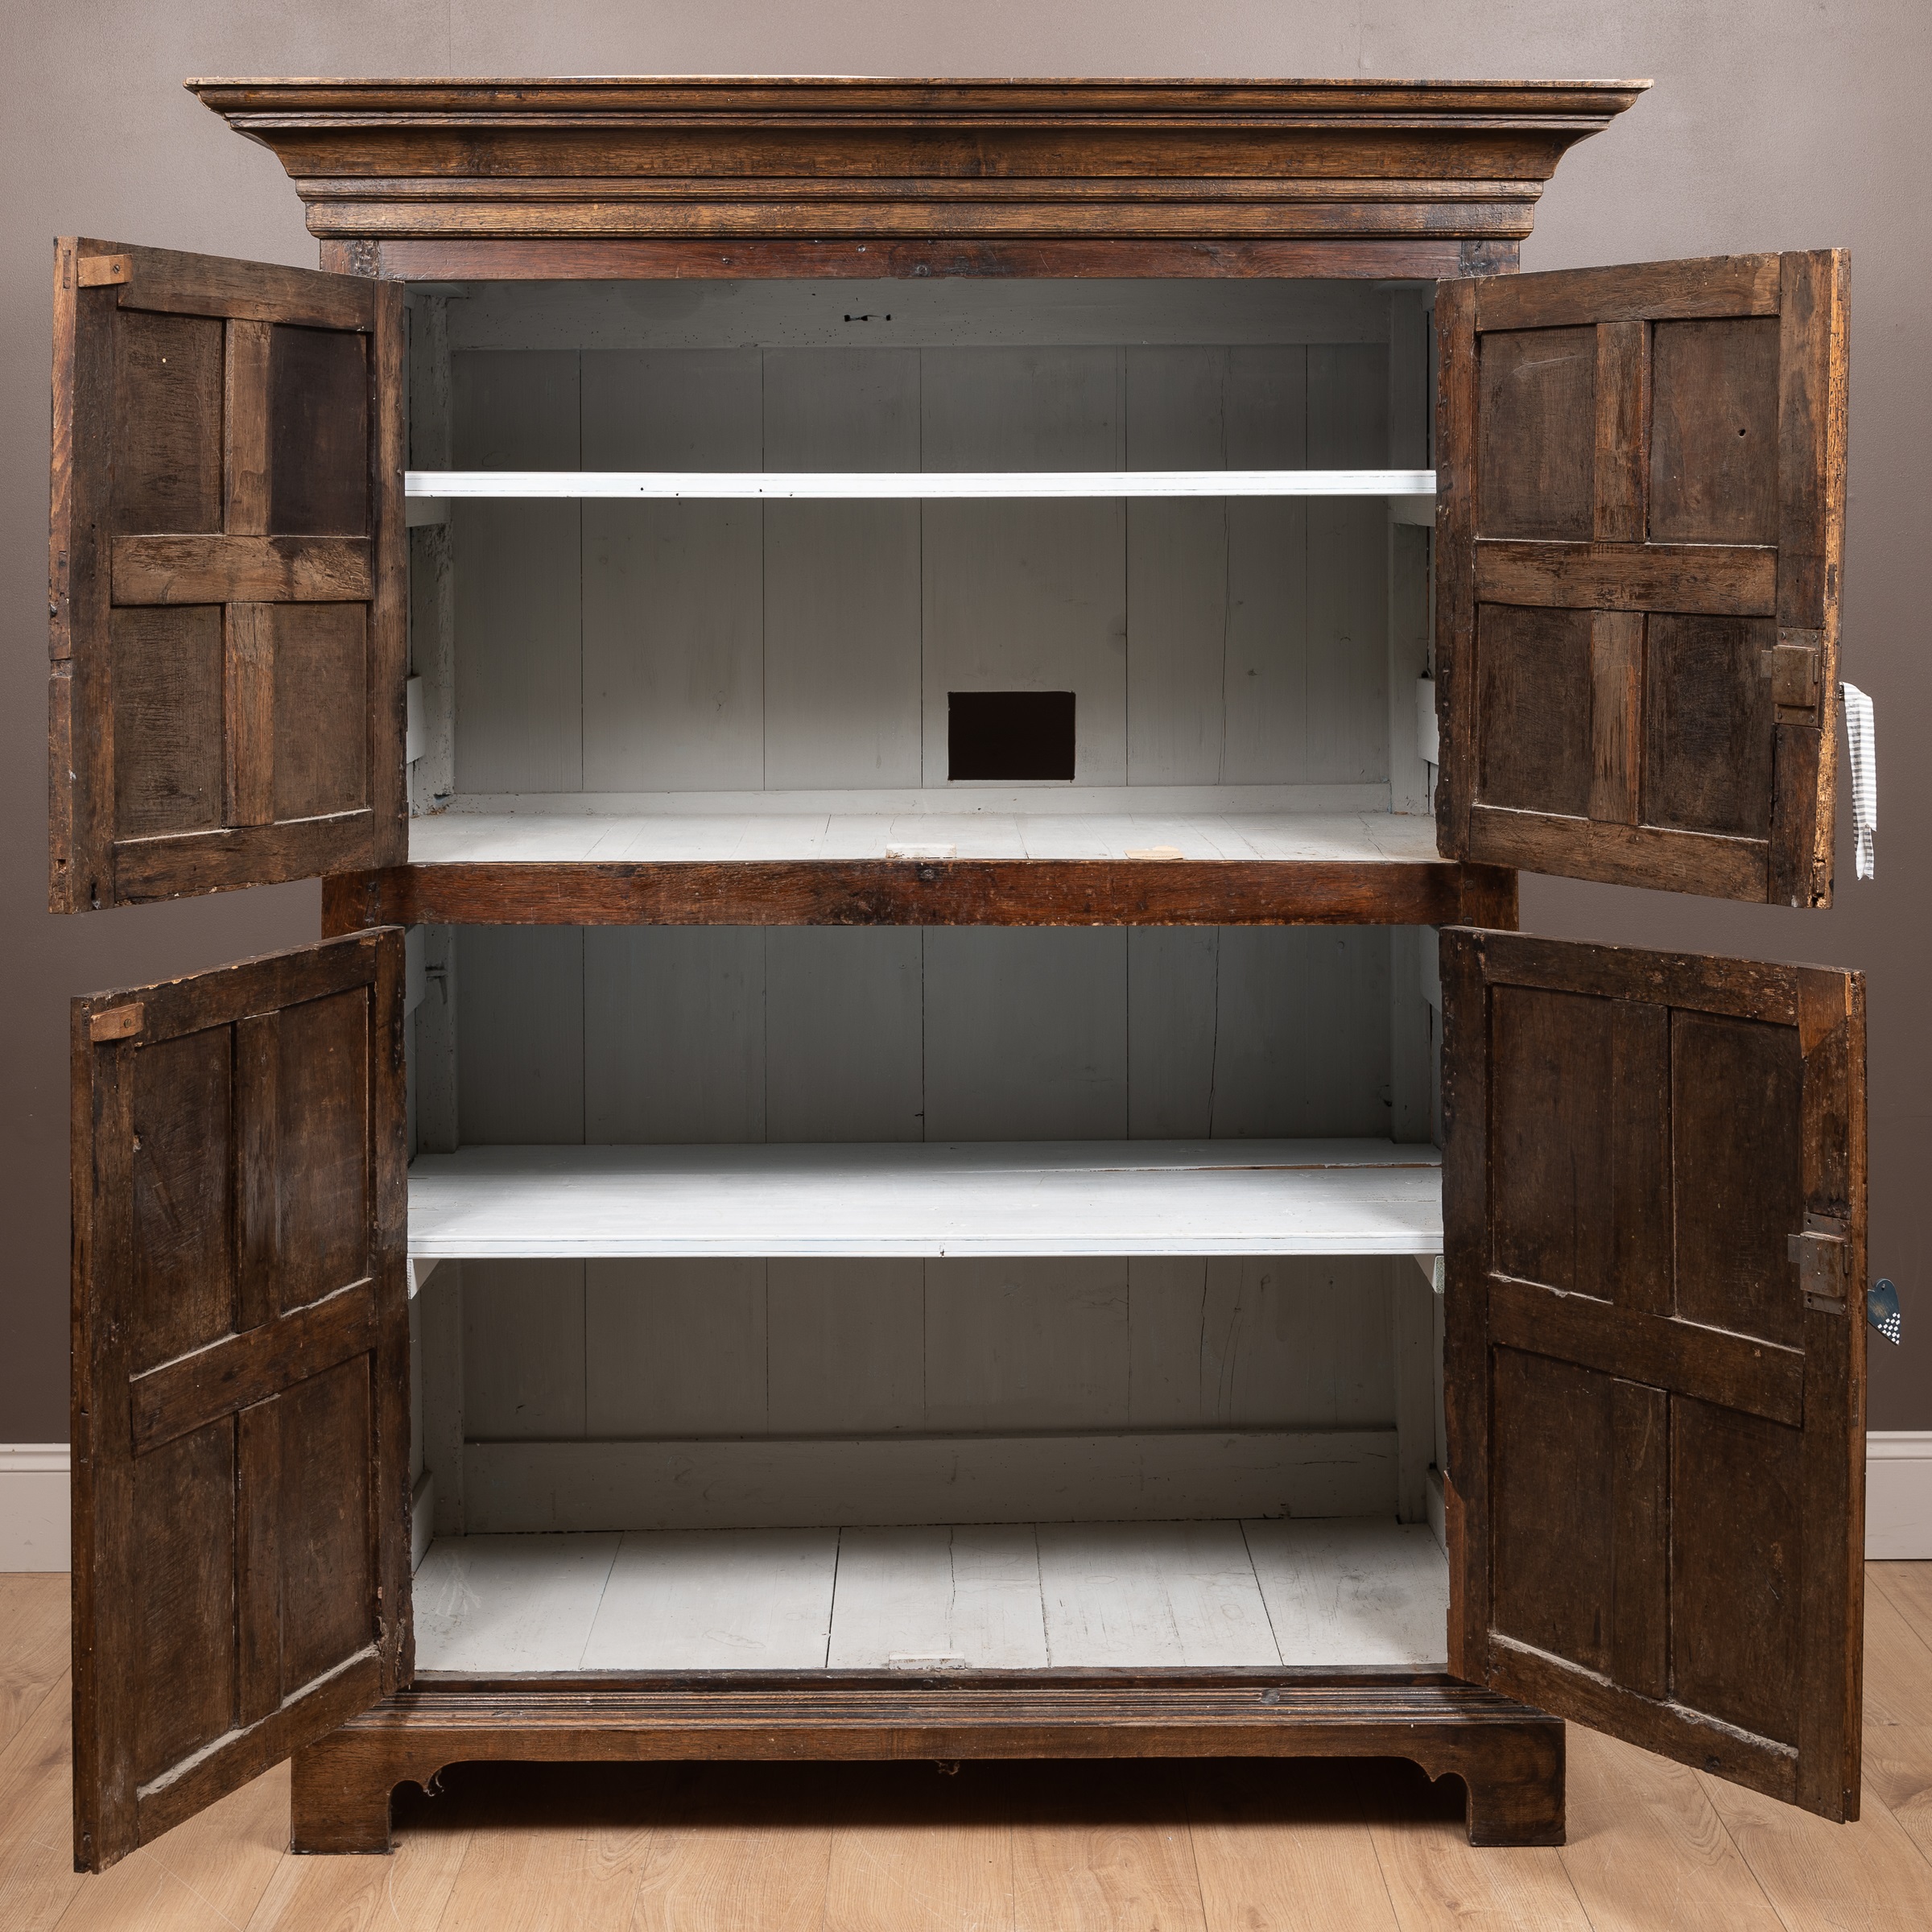 An oak panelled housekeepers cupboard - Image 2 of 3